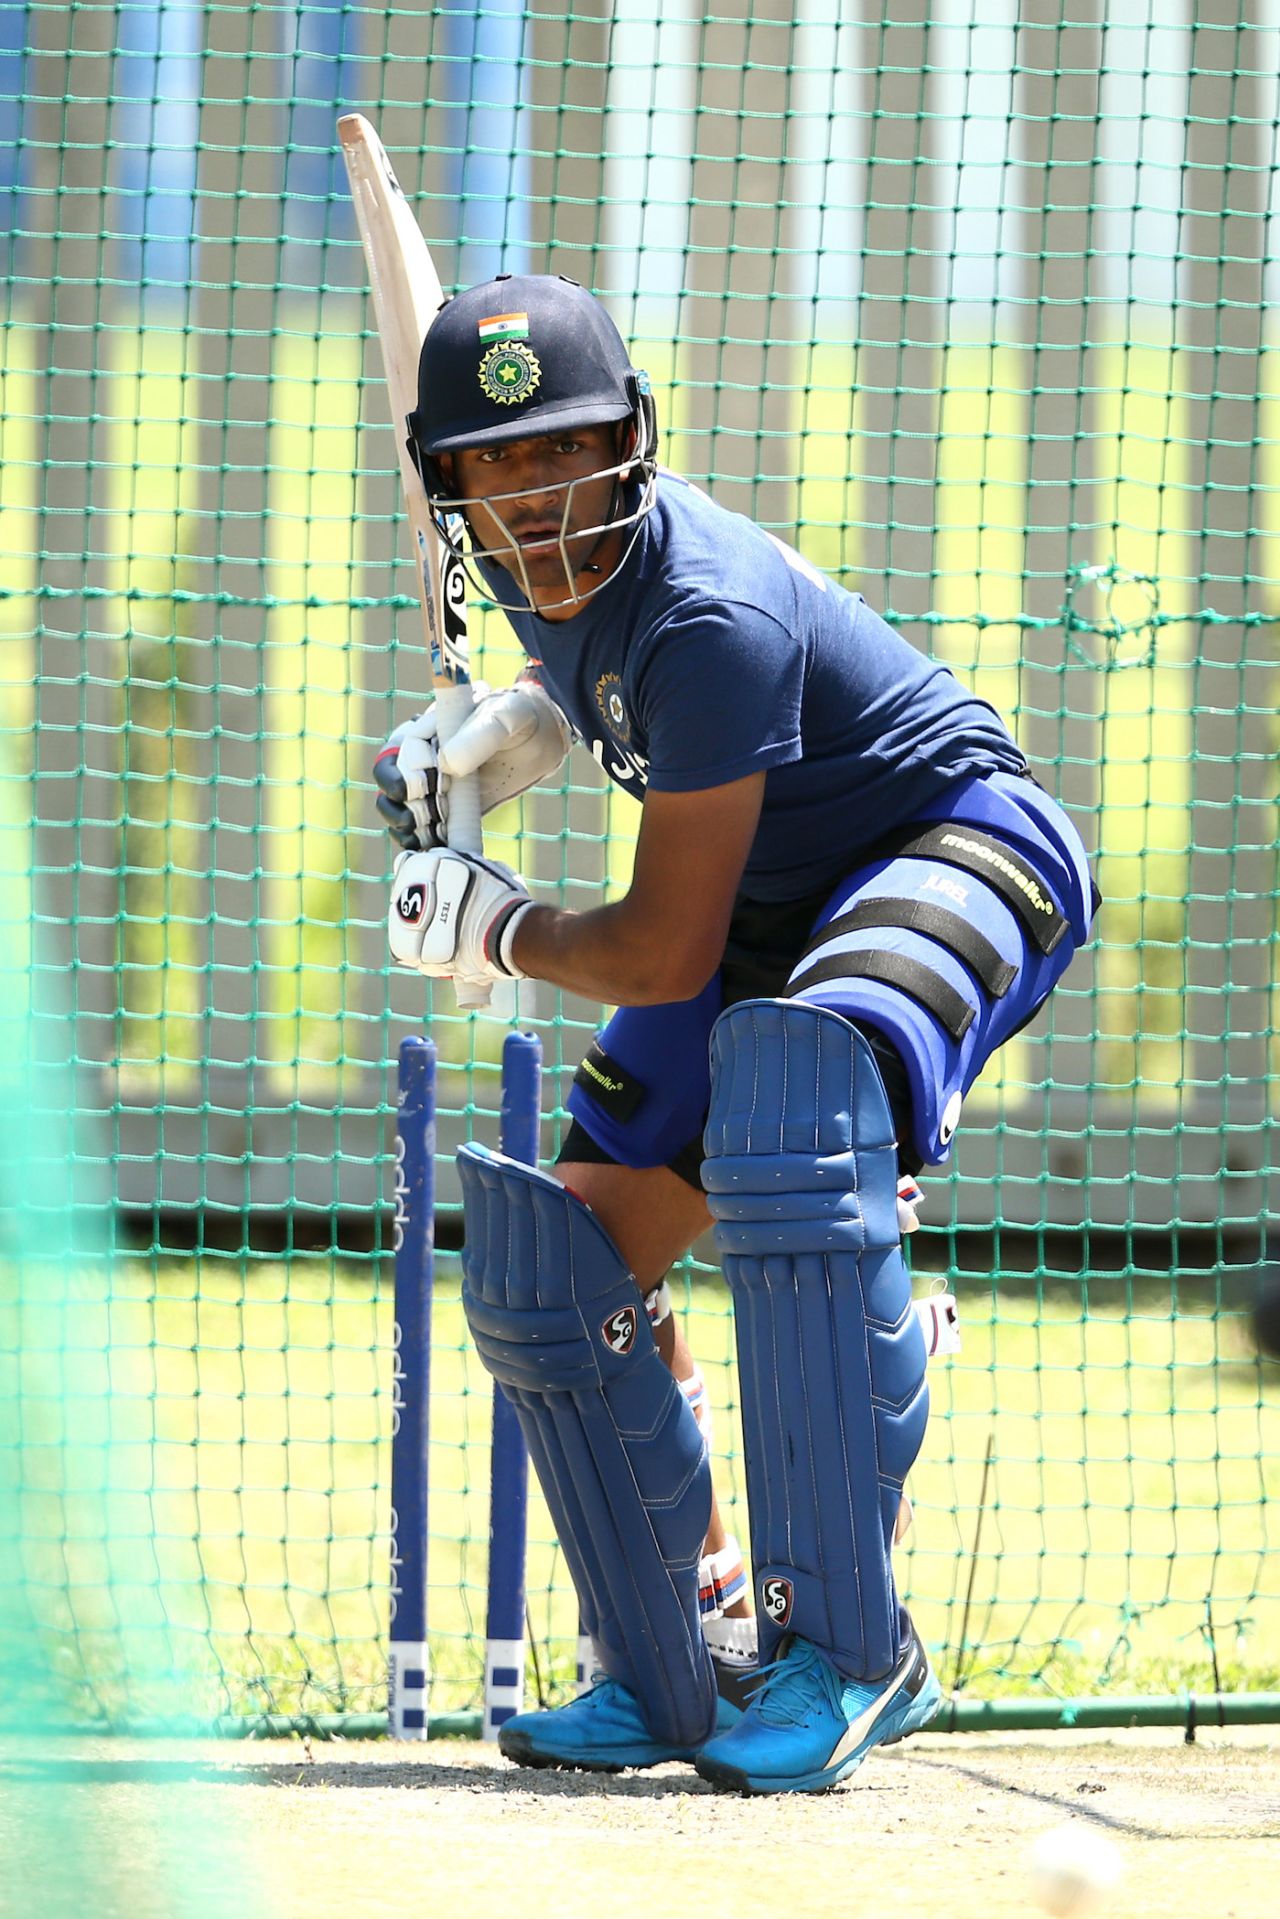 Dhruv Jurel has a hit in the nets, Potchefstroom, February 3, 2020